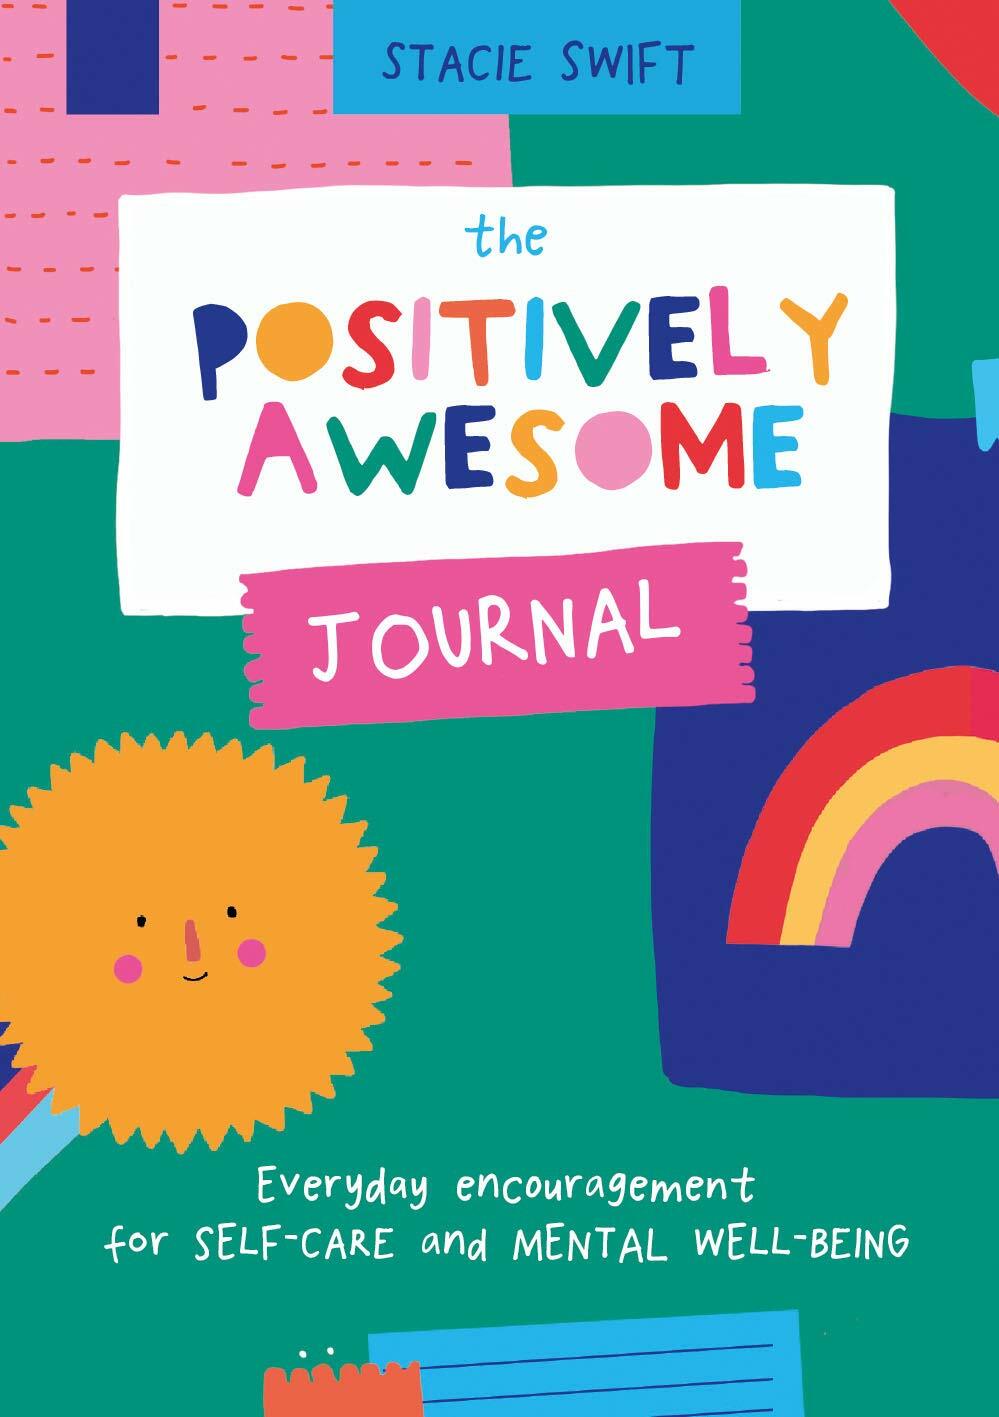 The Positively Awesome Journal : Everyday encouragement for self-care and mental well-being (Paperback)